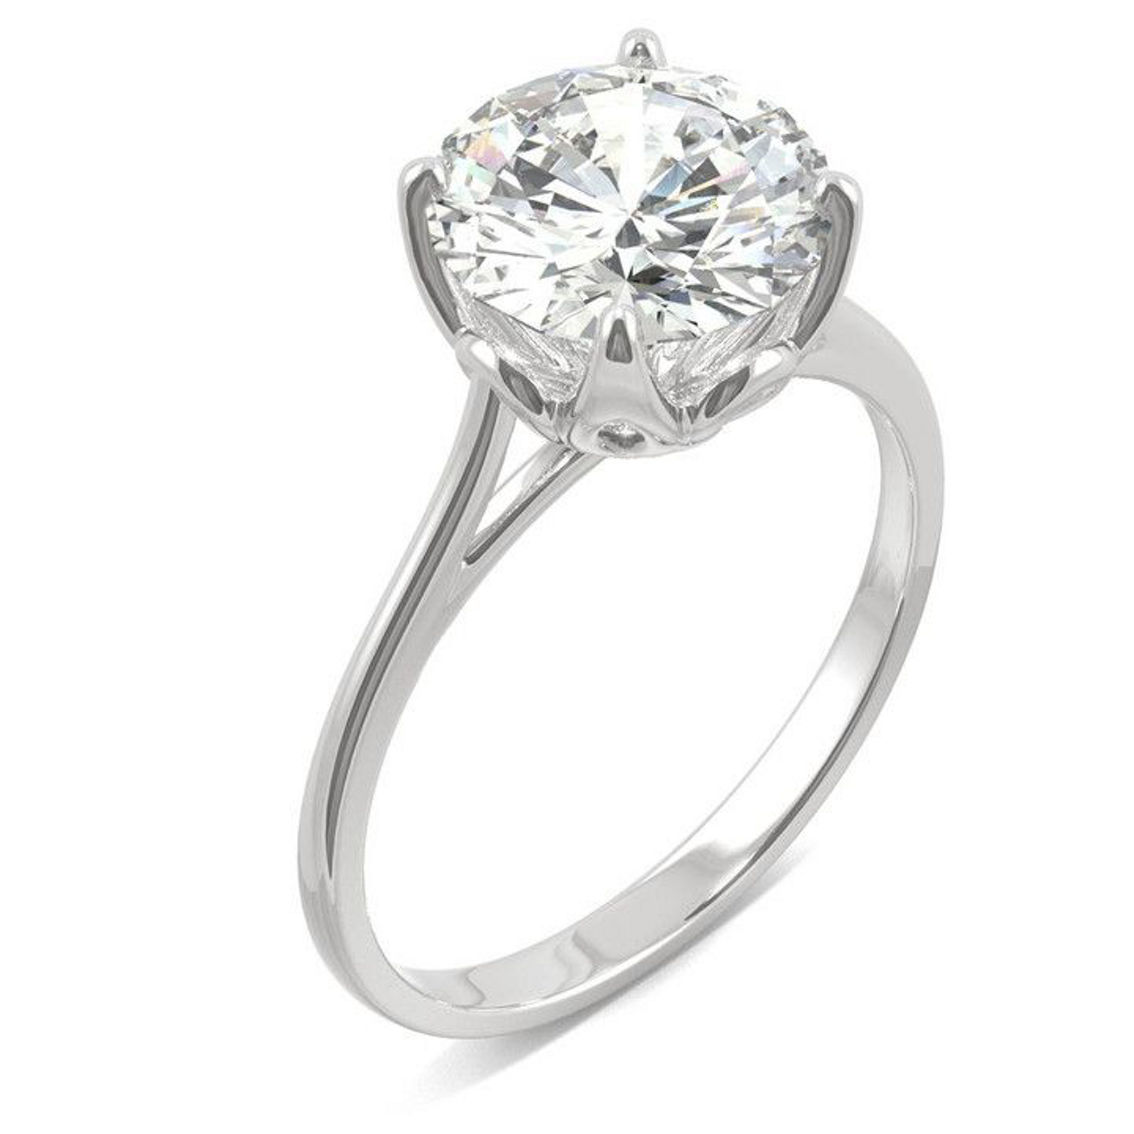 Charles & Colvard 2.70cttw Moissanite Solitaire Engagement Ring in 14k Yellow Gold - Image 2 of 5